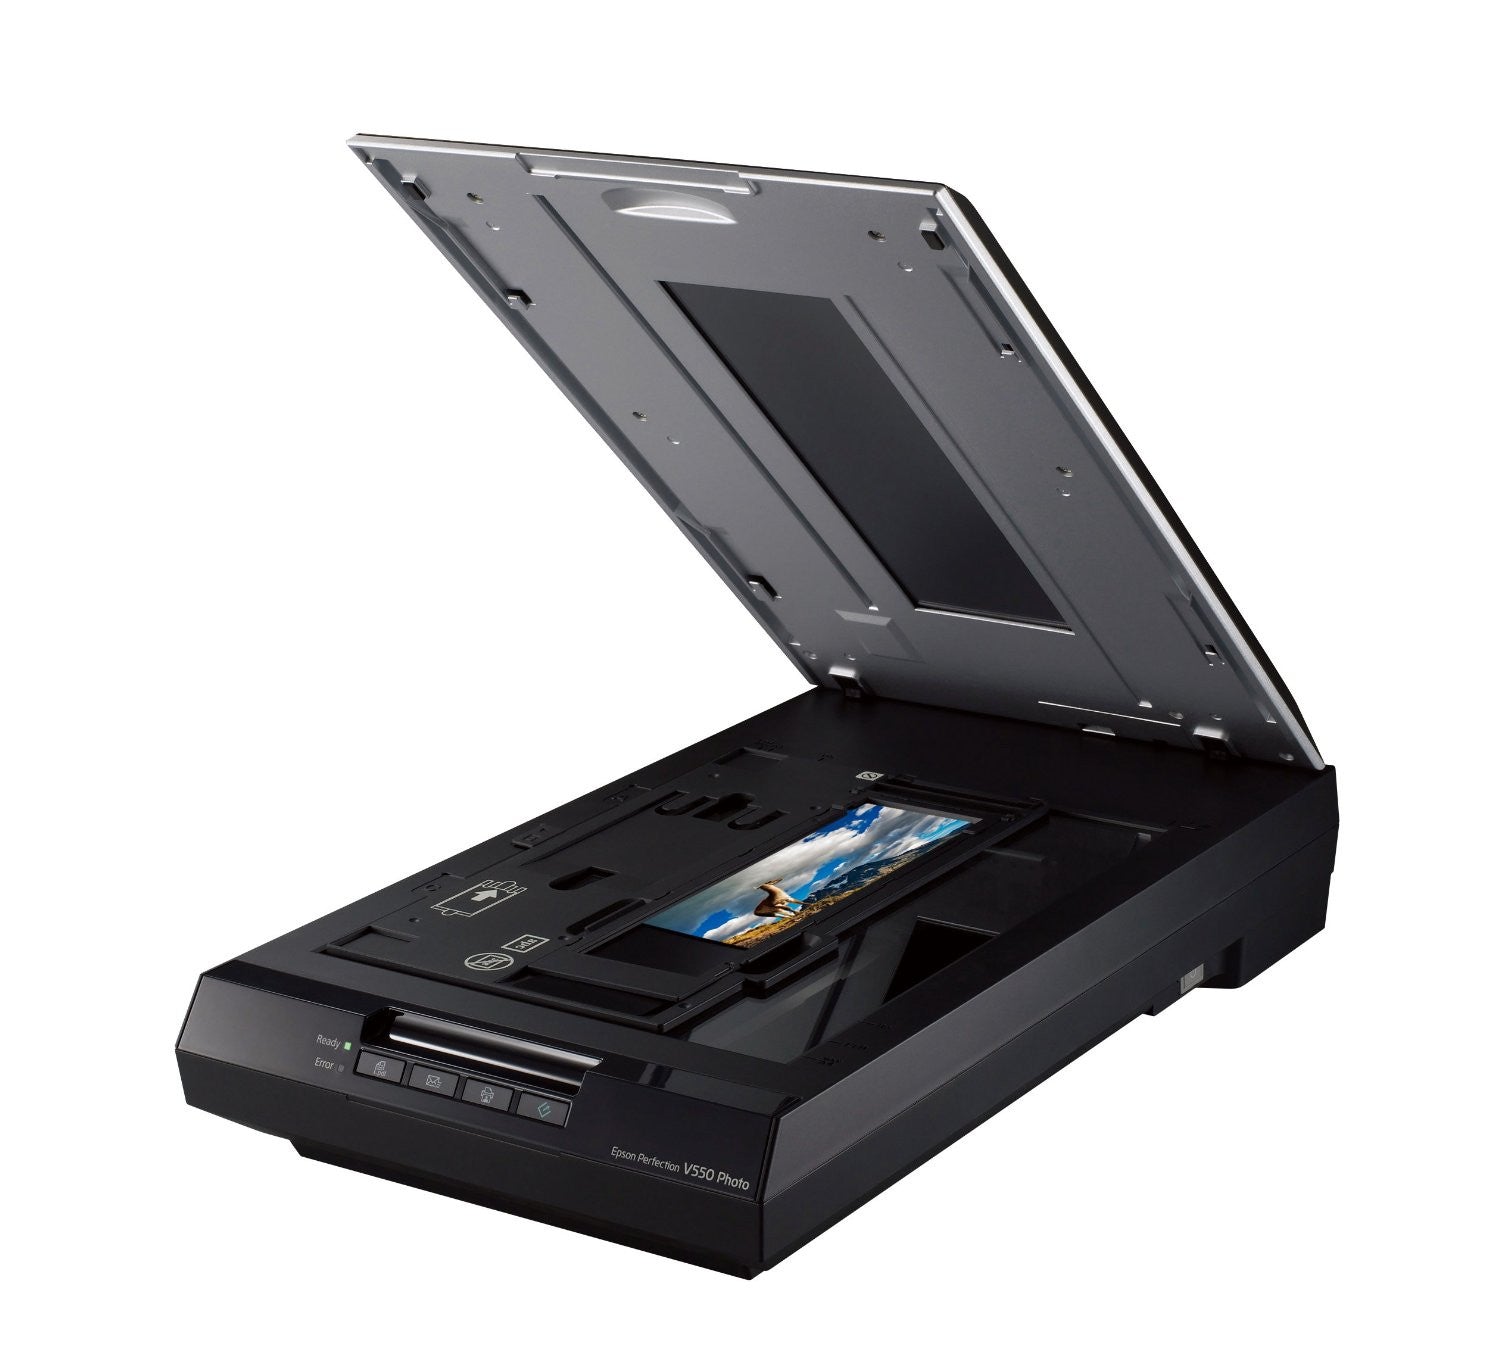 Epson V550 Perfection Photo Scanner, computers flatbed scanners, Epson - Pictureline  - 2